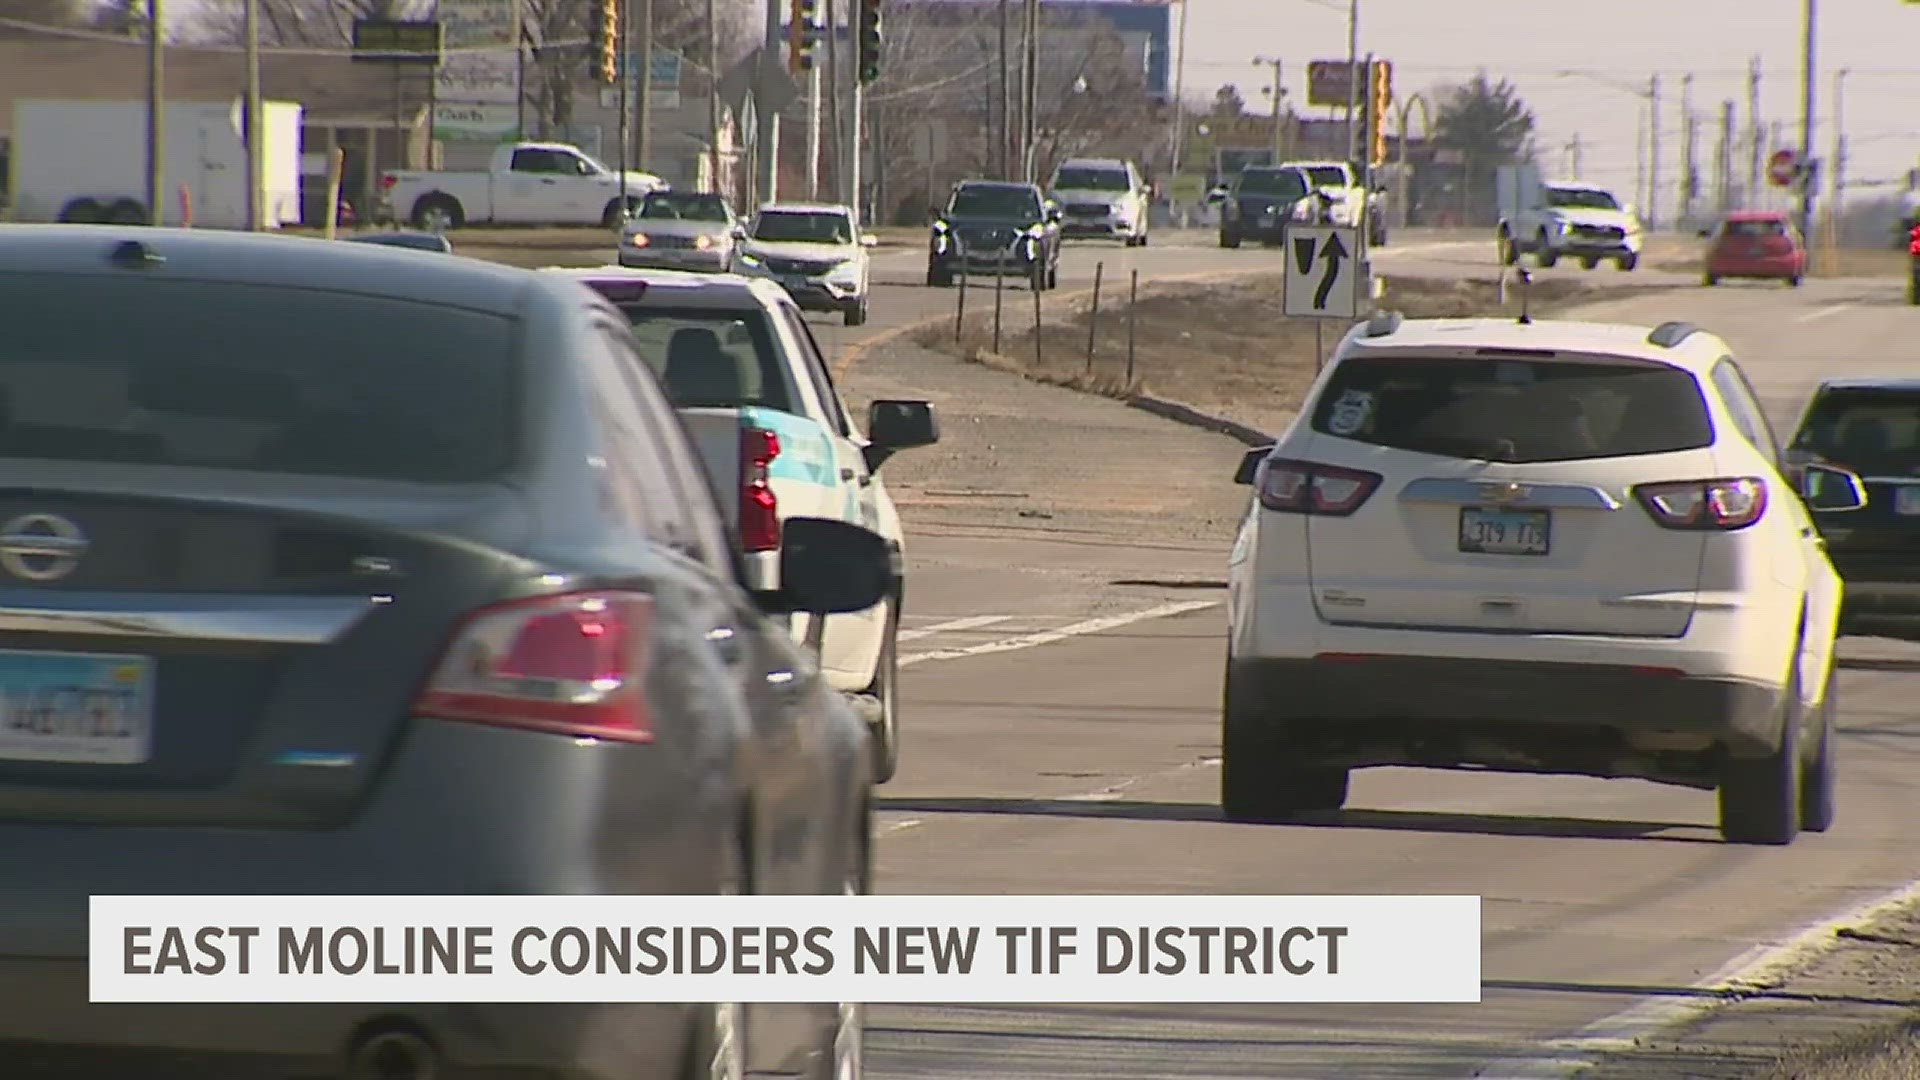 City officials said it will take approximately 6 months to bring the new TIF to fruition, if all goes as planned.